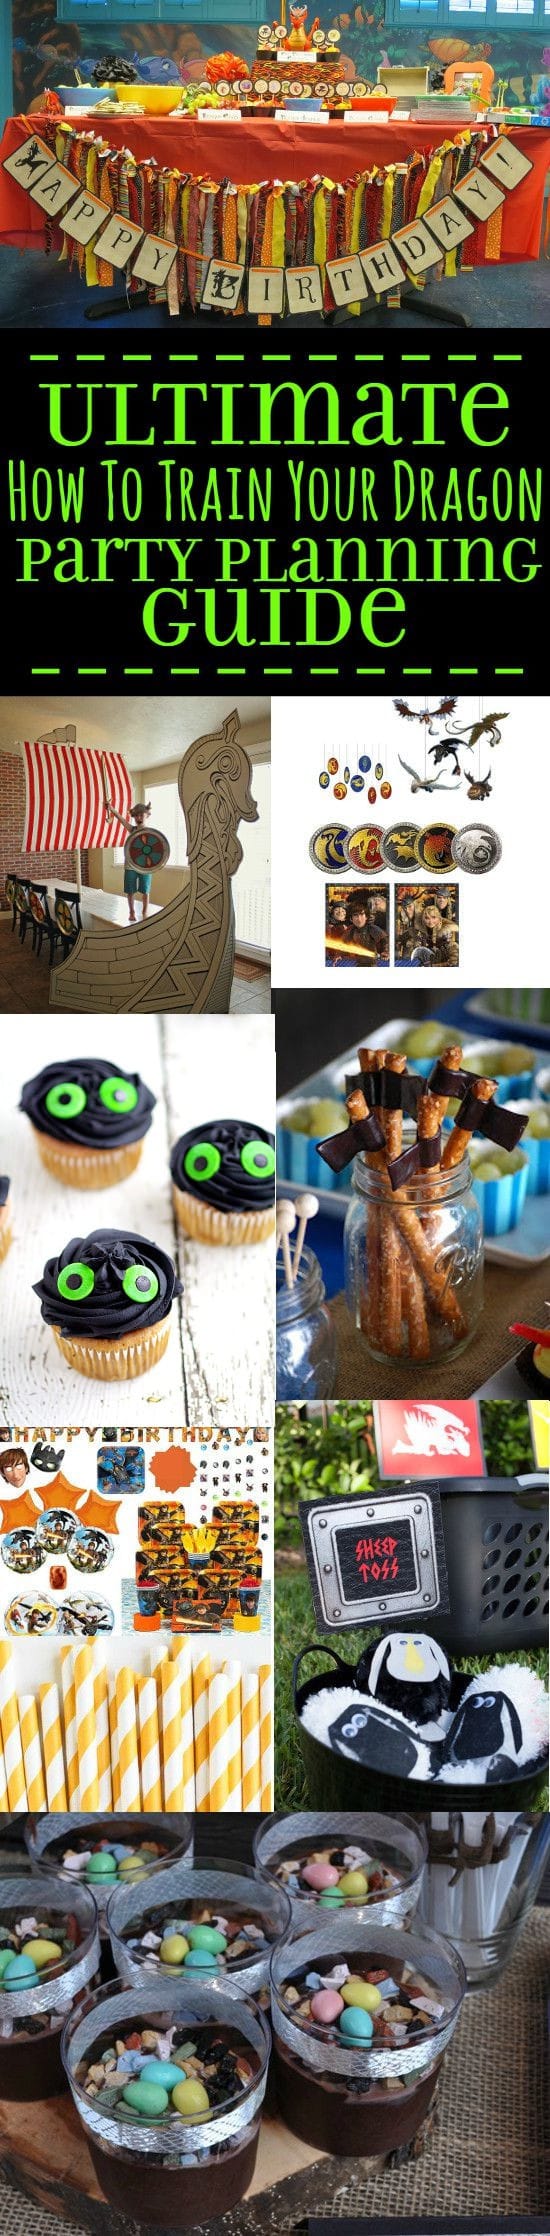 The Ultimate Toothless and How to Train Your Dragon Birthday Party ideas and planning guide, with birthday cakes, food, decorations, games, and supplies. Perfect for your little Dragon Trainer in training. Definitely using these party ideas for my son's birthday next month!